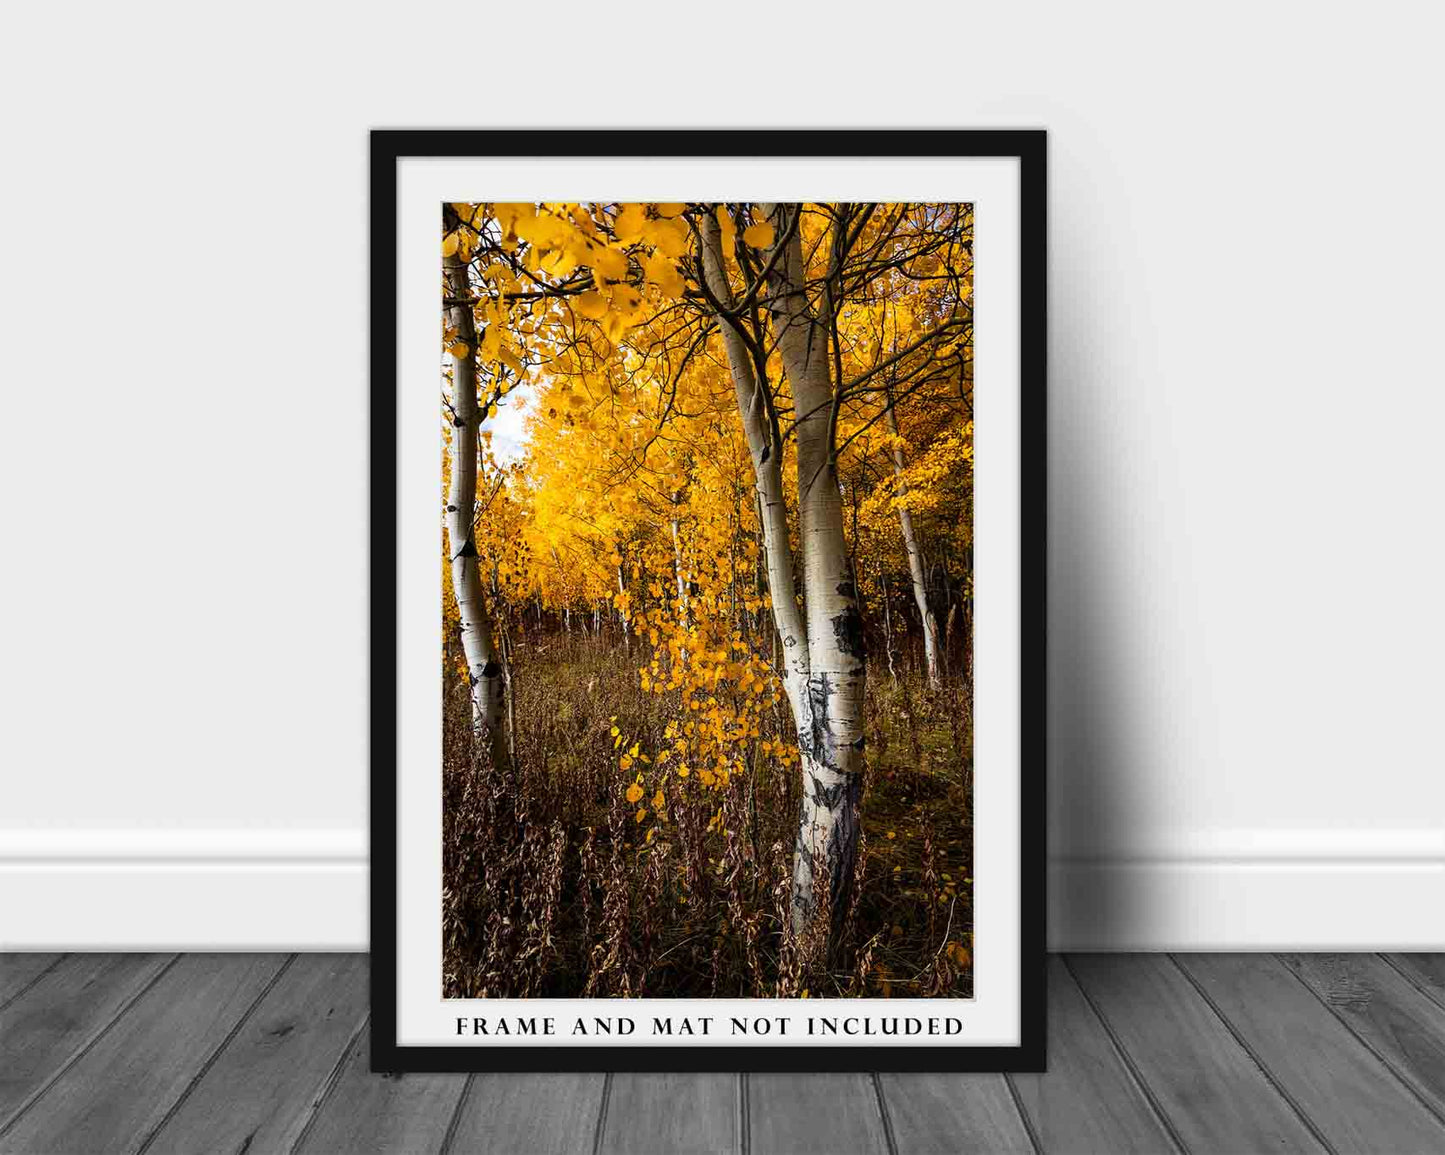 Autumn Photography Print - Vertical Picture of Aspen Trees on Fall Day in Wyoming - Rocky Mountain Forest Wall Art Nature Photo Artwork